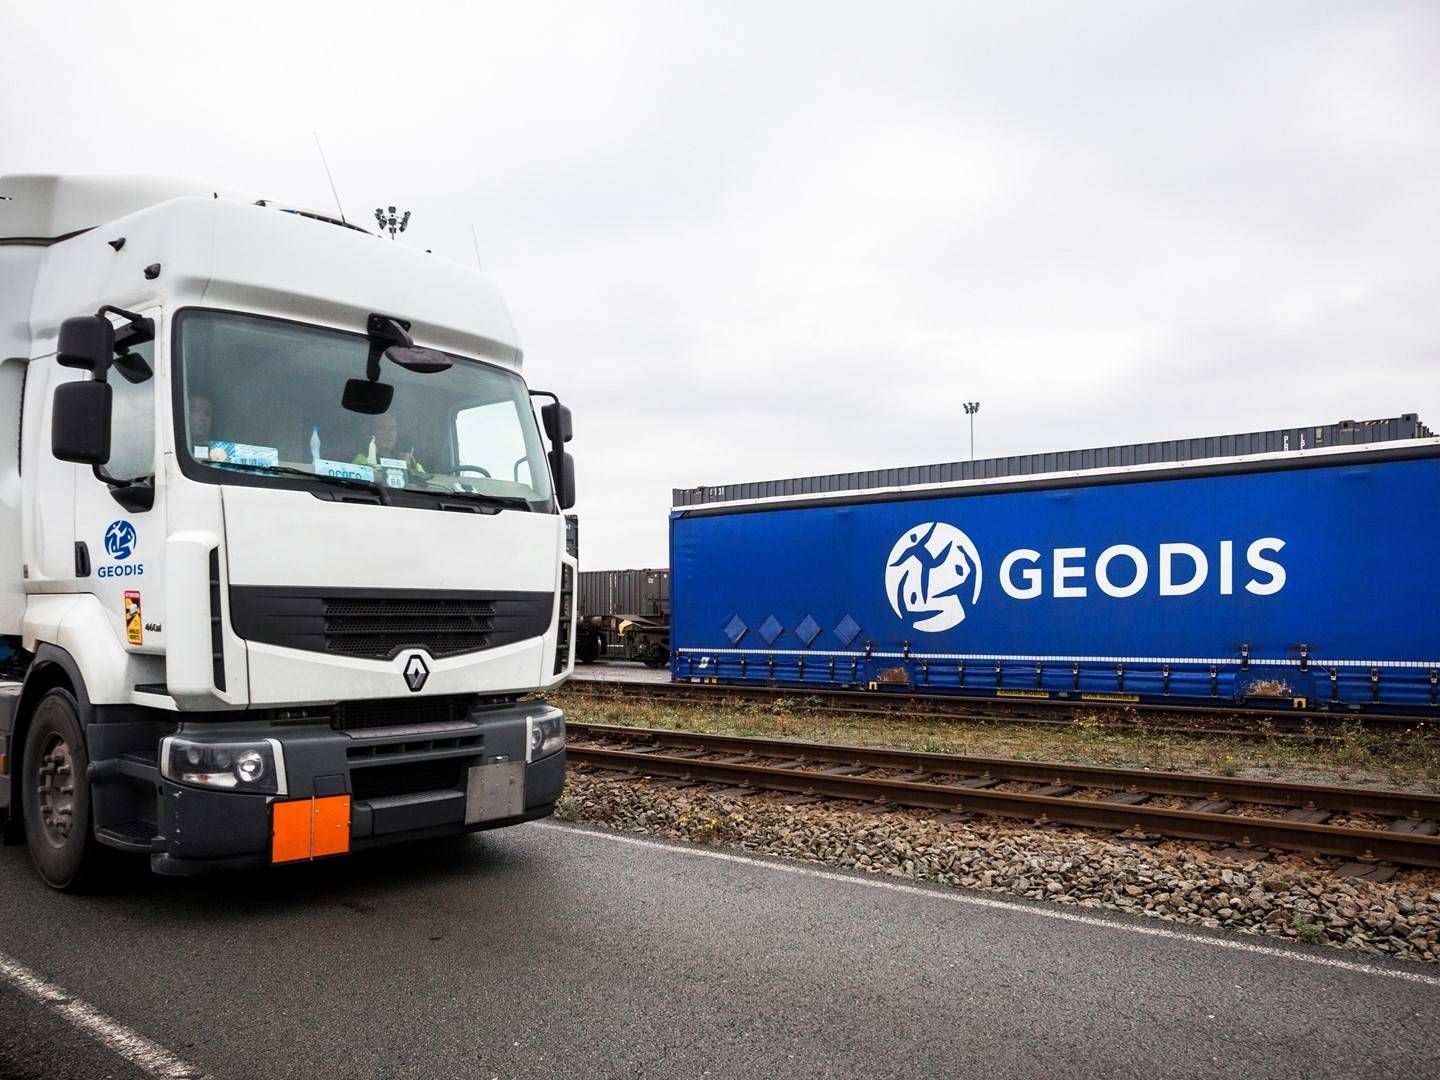 "There is no doubt that the pharma industry is not only important to us here in Denmark. It is seen as an industry with enormous potential for us freight forwarders in both Europe and globally," says Kent Husted, managing director of Geodis in Denmark. | Foto: Geodis / Pr